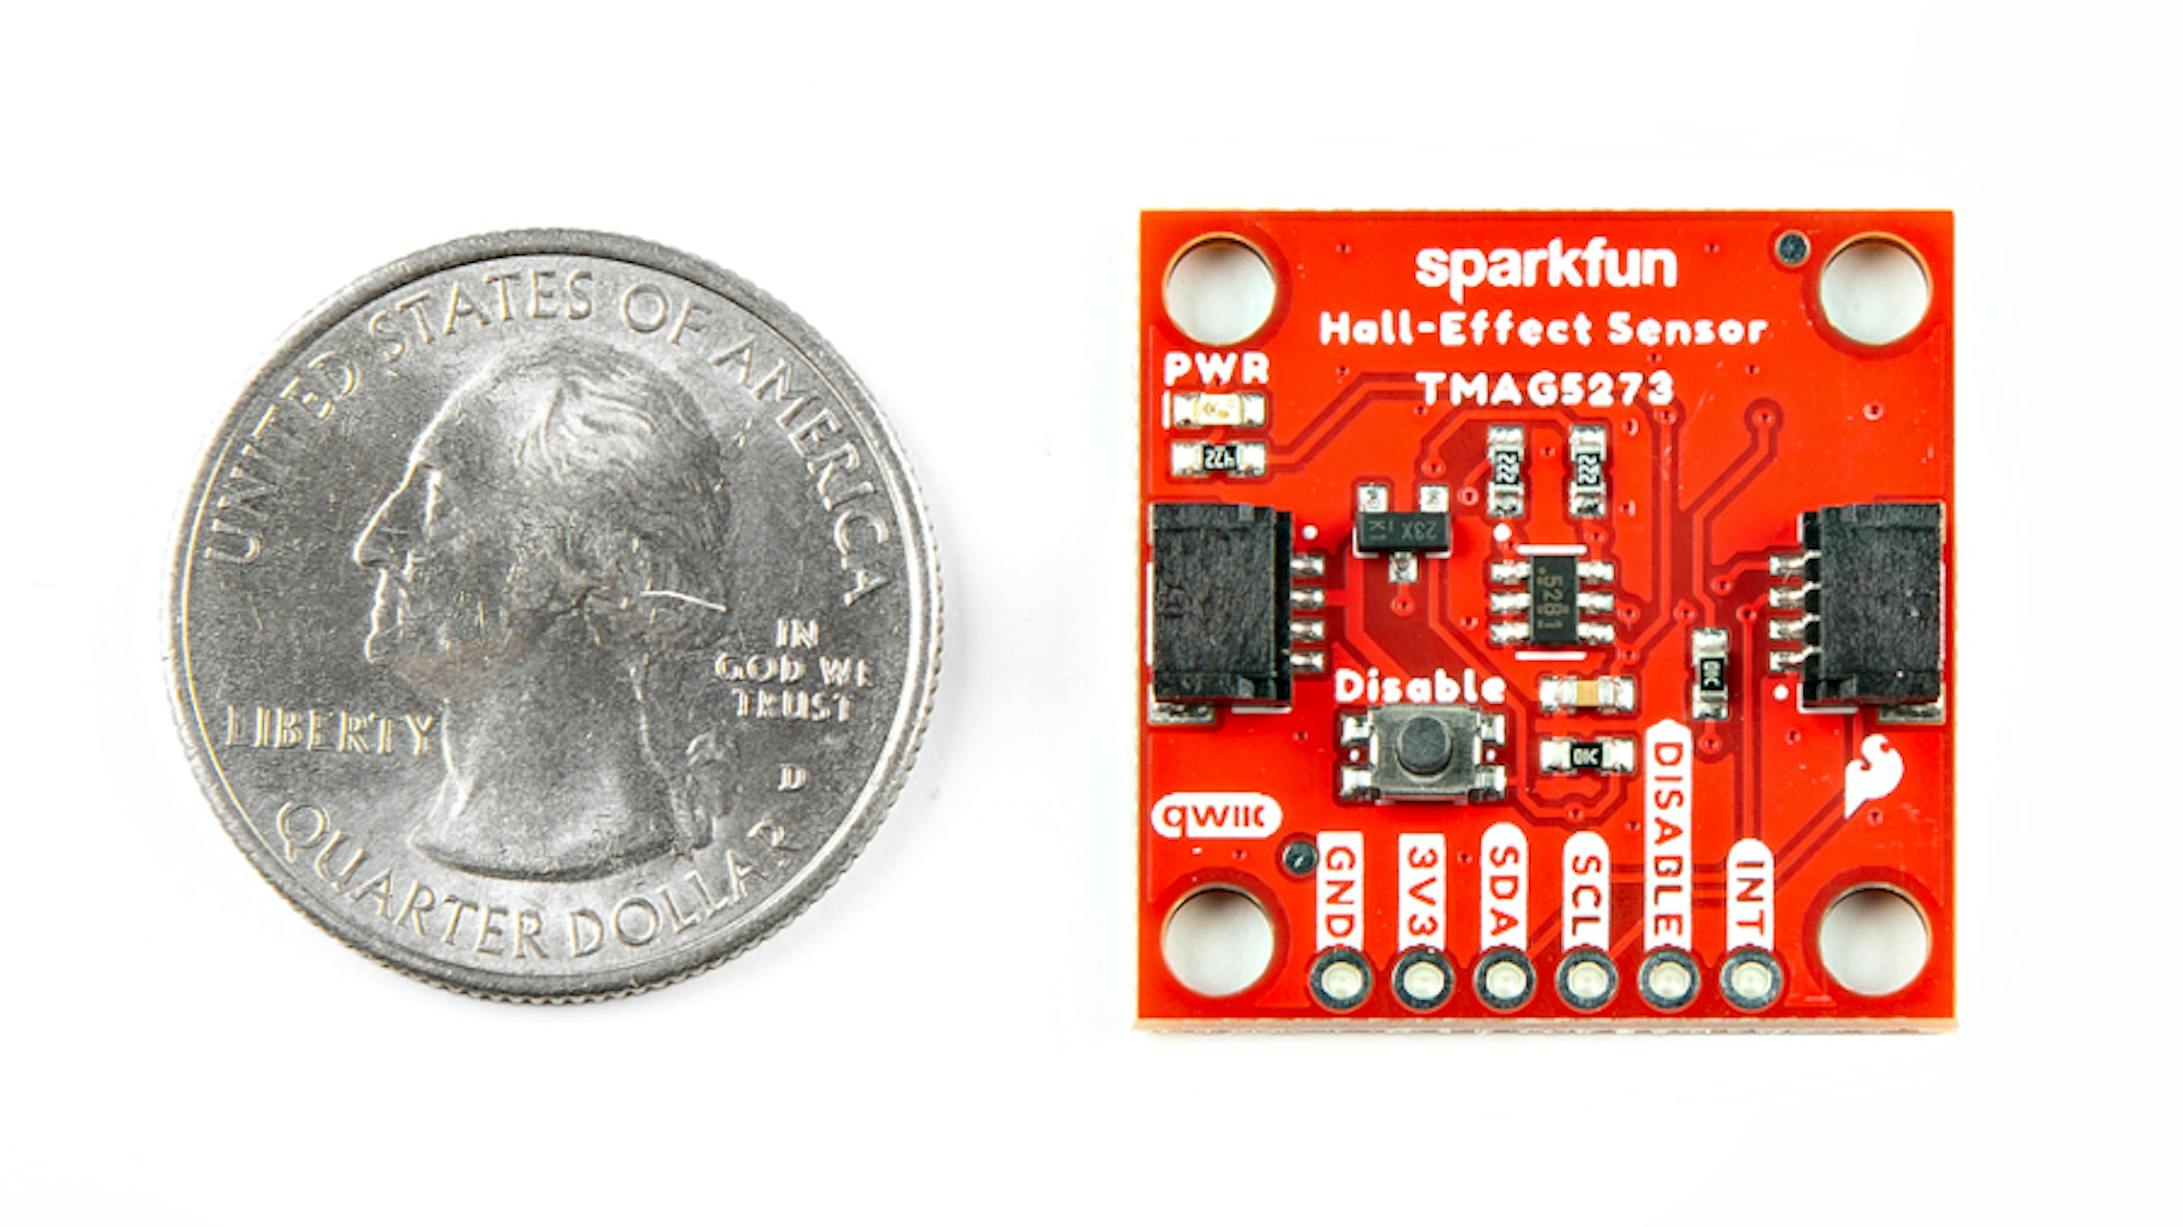 SparkFun Peers Into the Magnetic Realm with New Qwiic Linear 3D 